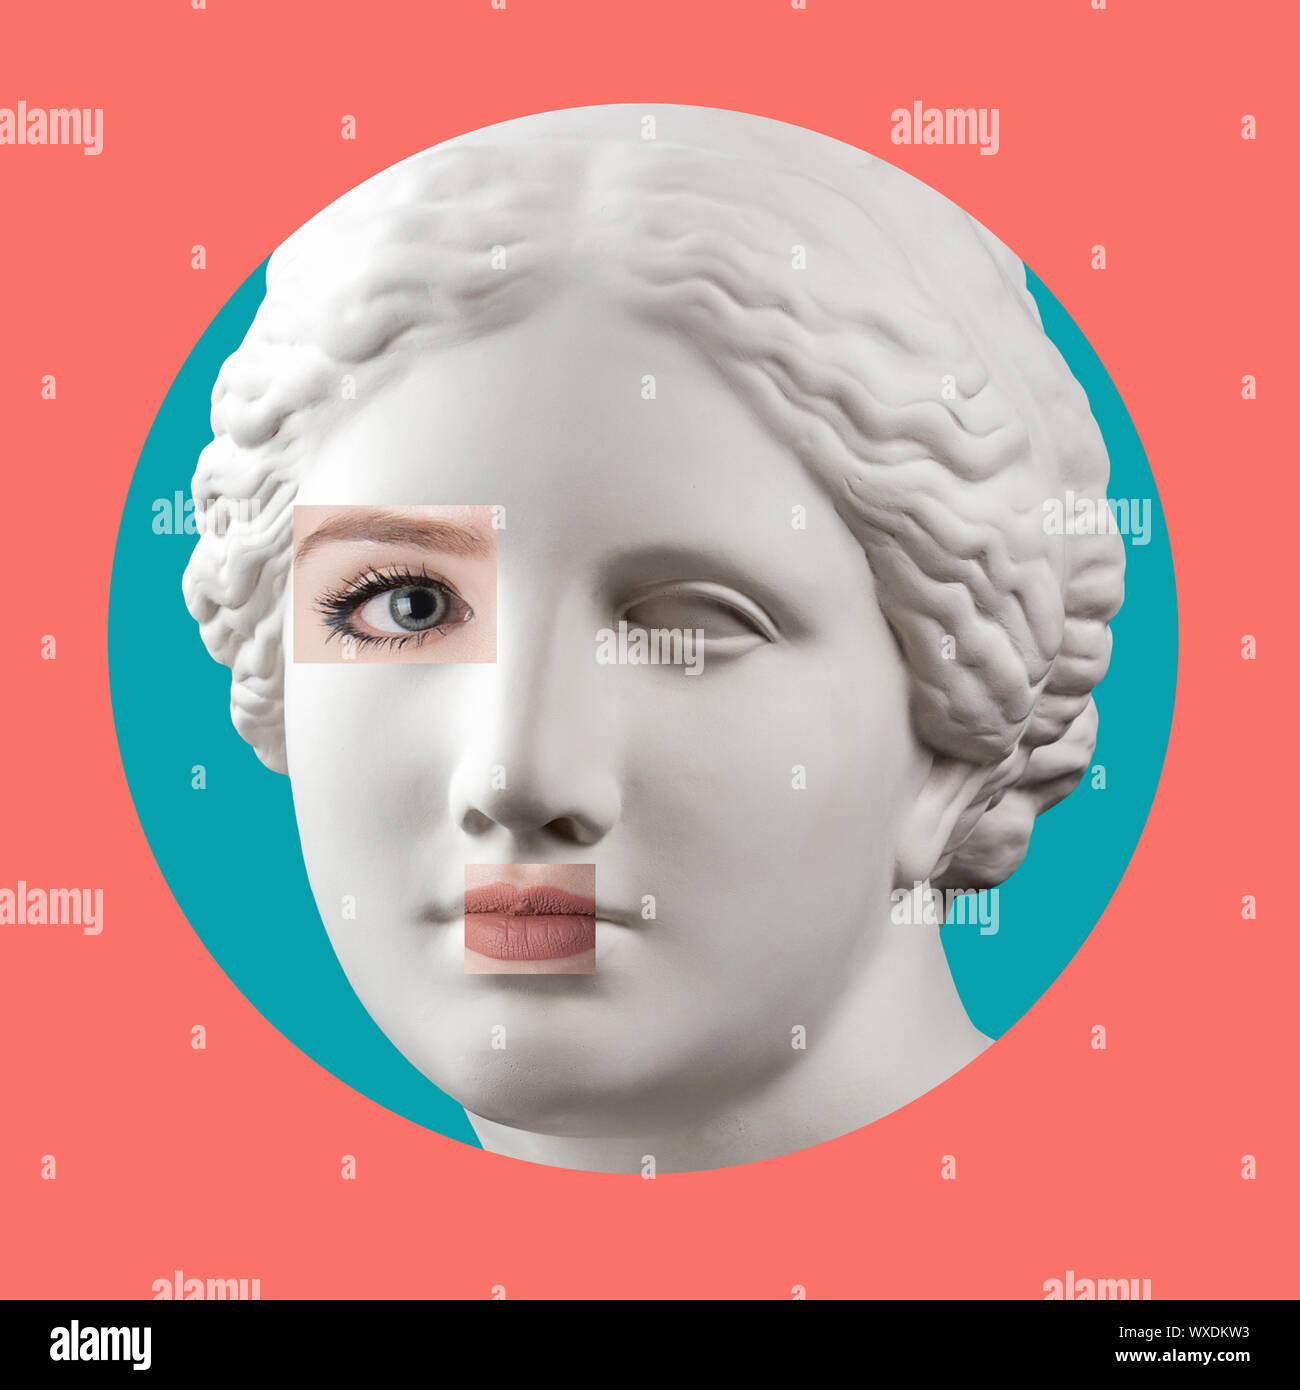 Contemporary art poster with ancient statue of Venus head and details of a living woman's face. Stock Photo